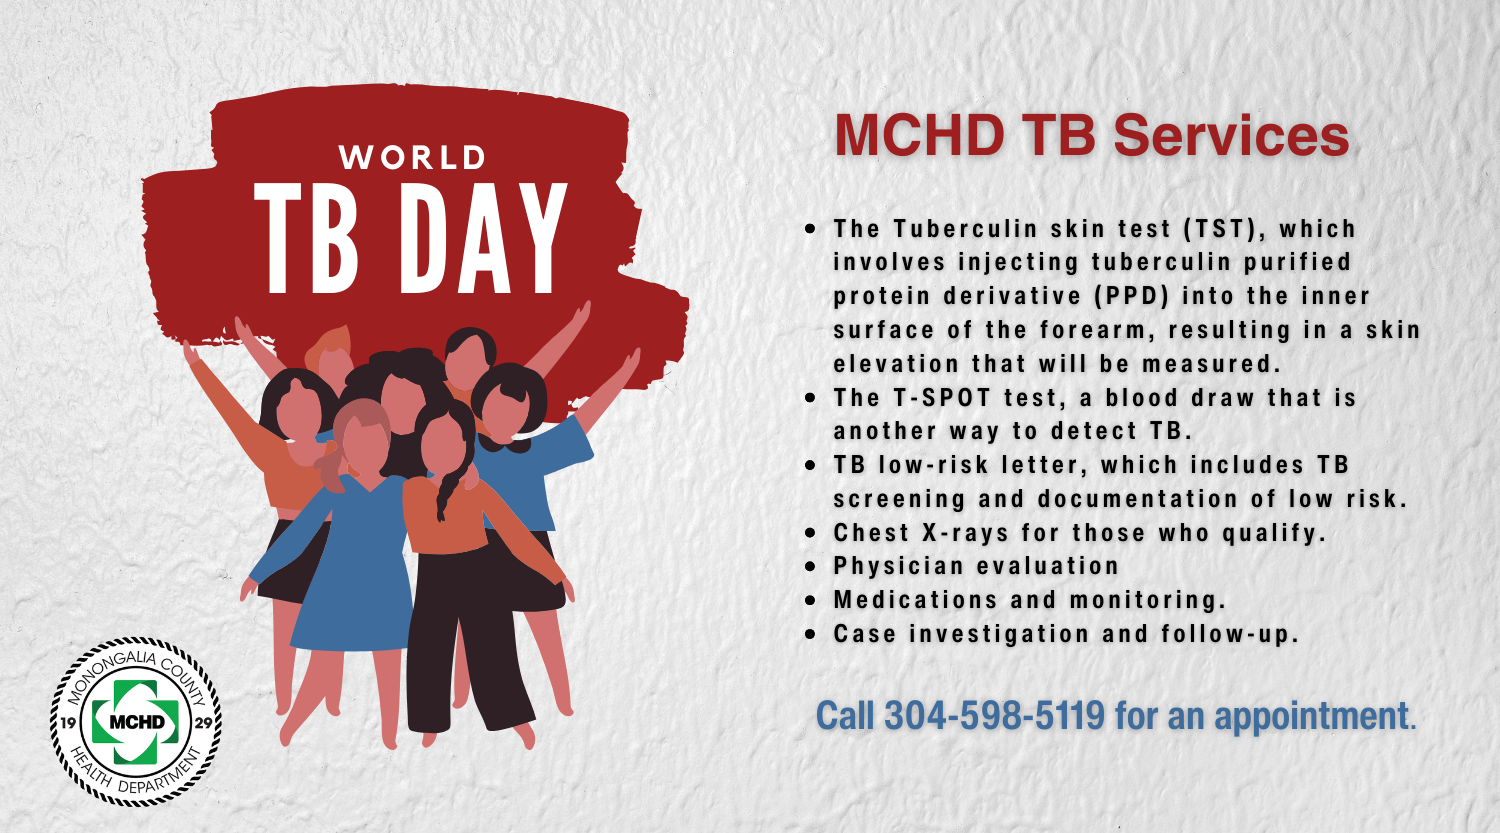 When it comes to tuberculosis, MCHD is here to help